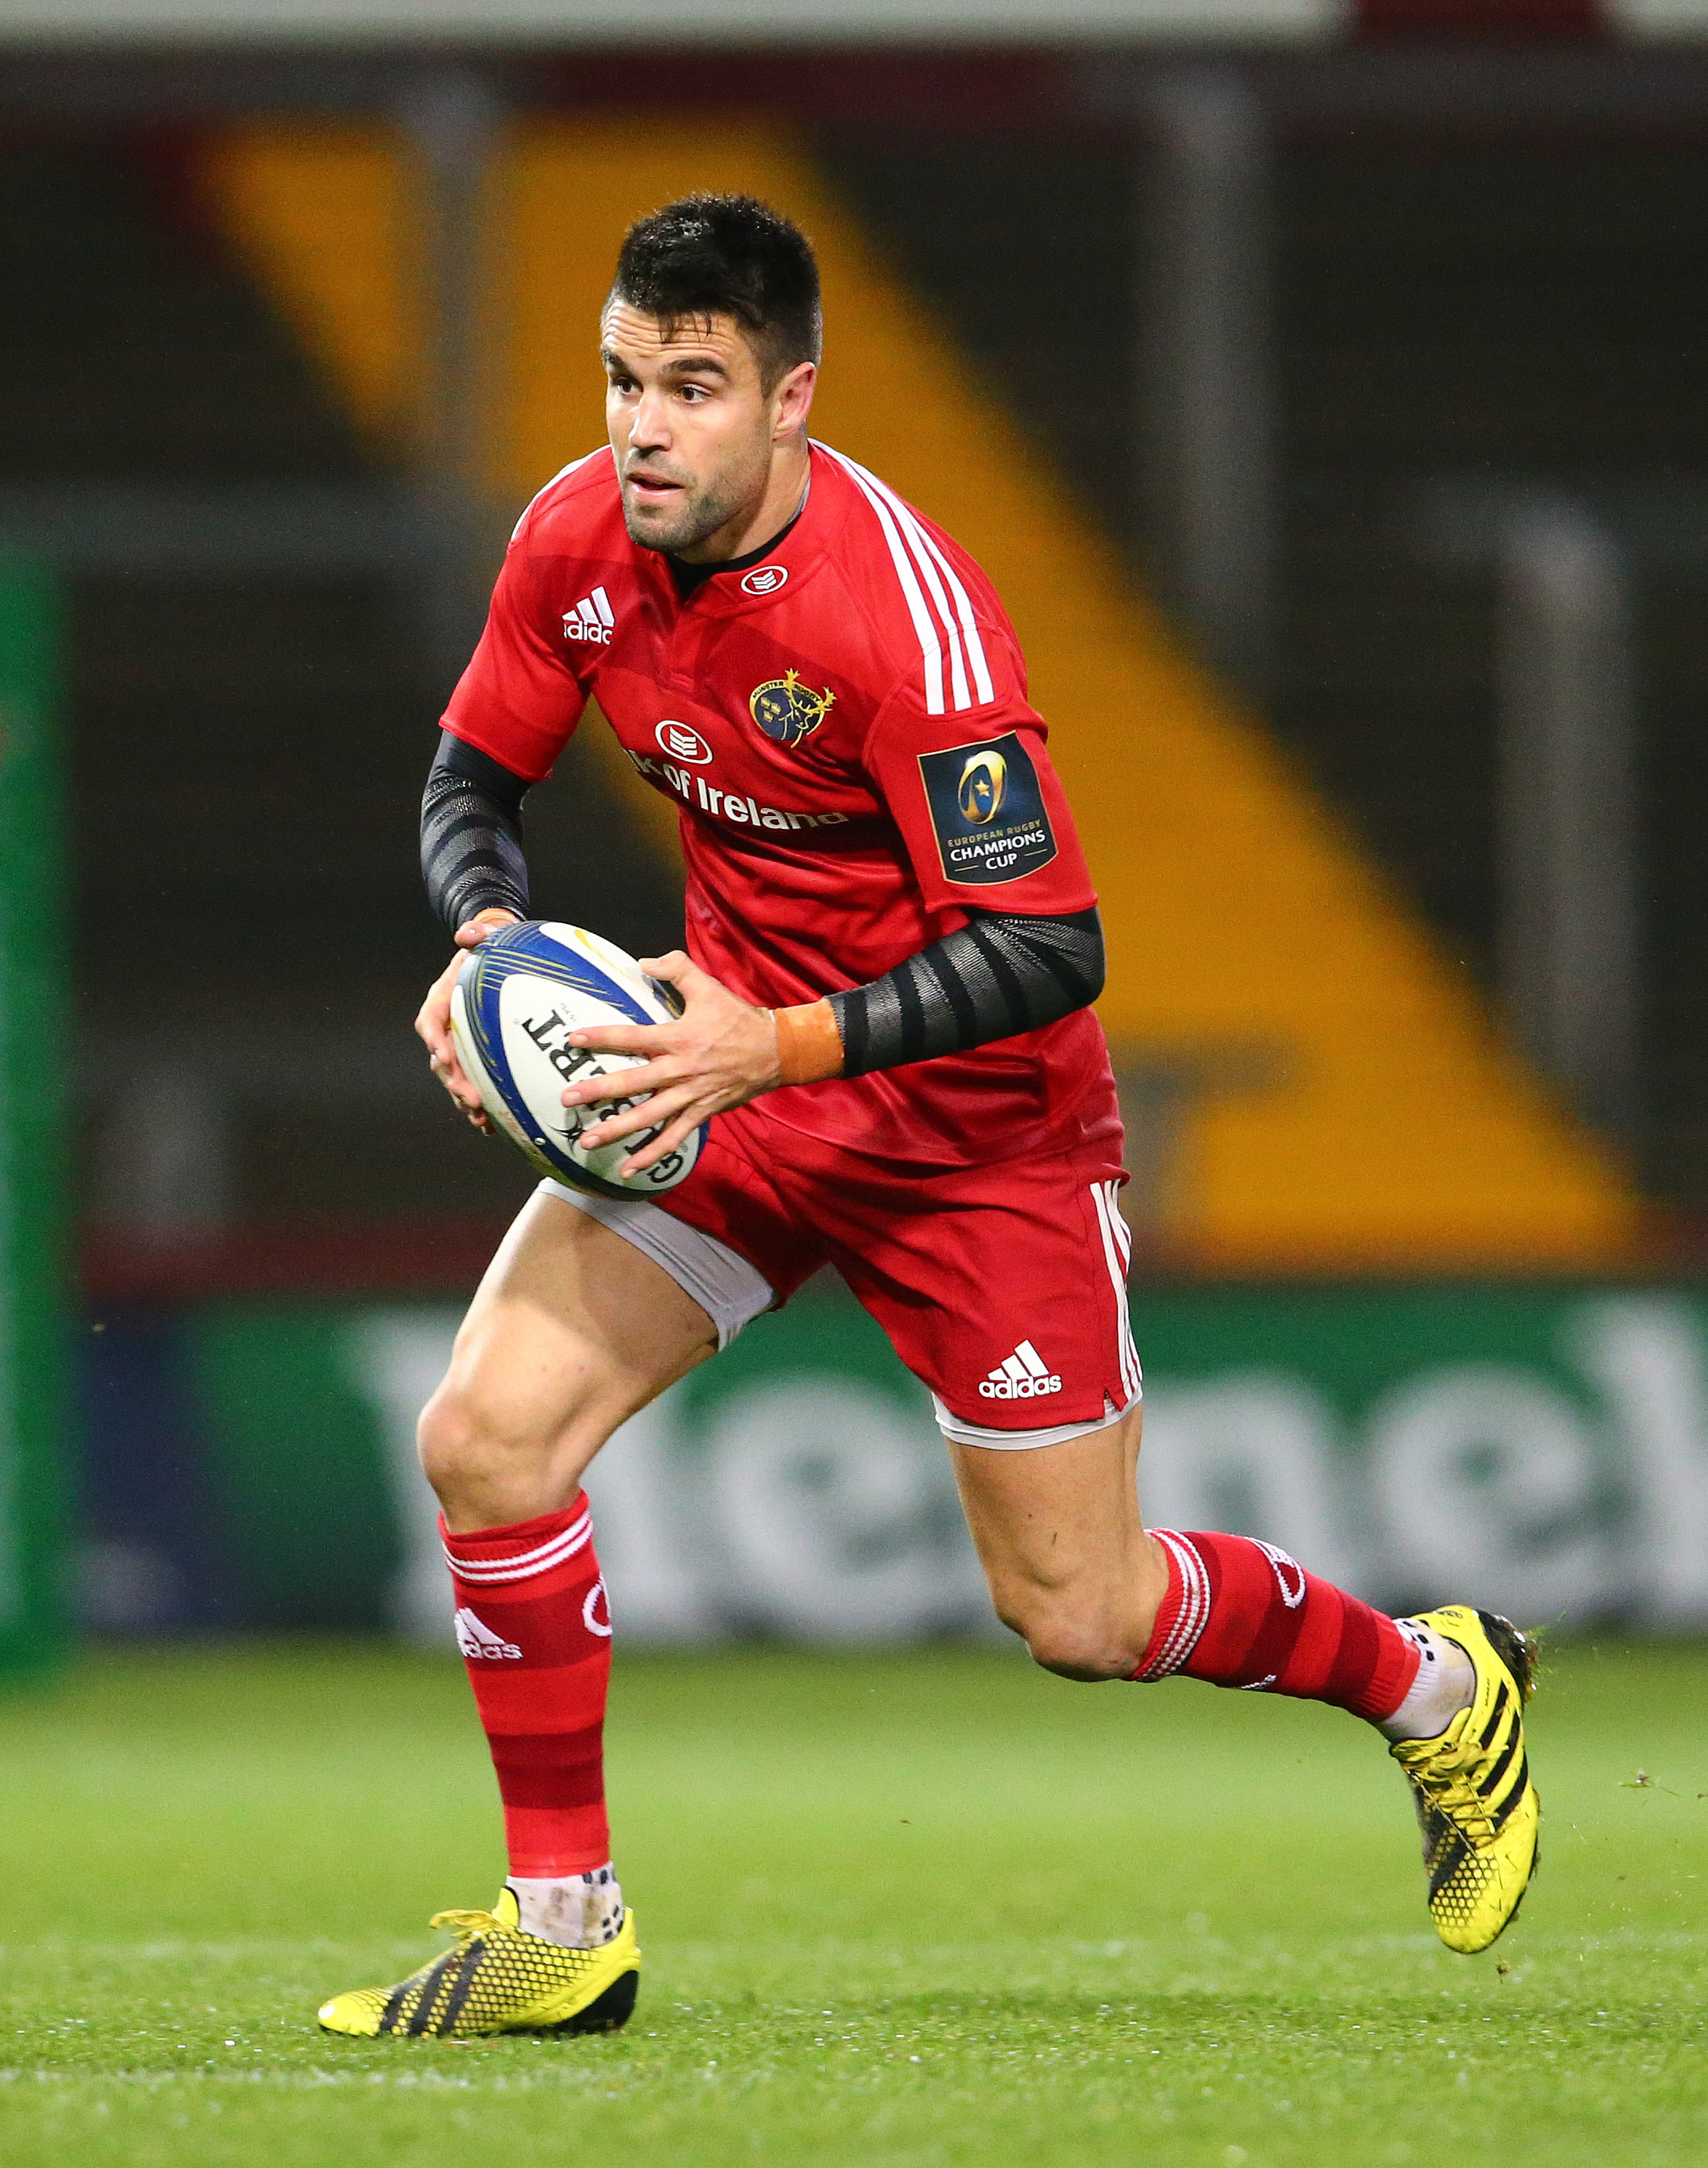 European Rugby Champions Cup Round 1, Thomond Park, Limerick 14/11/2015 Munster vs Benetton Treviso Munster's Conor Murray Mandatory Credit ©INPHO/Cathal Noonan